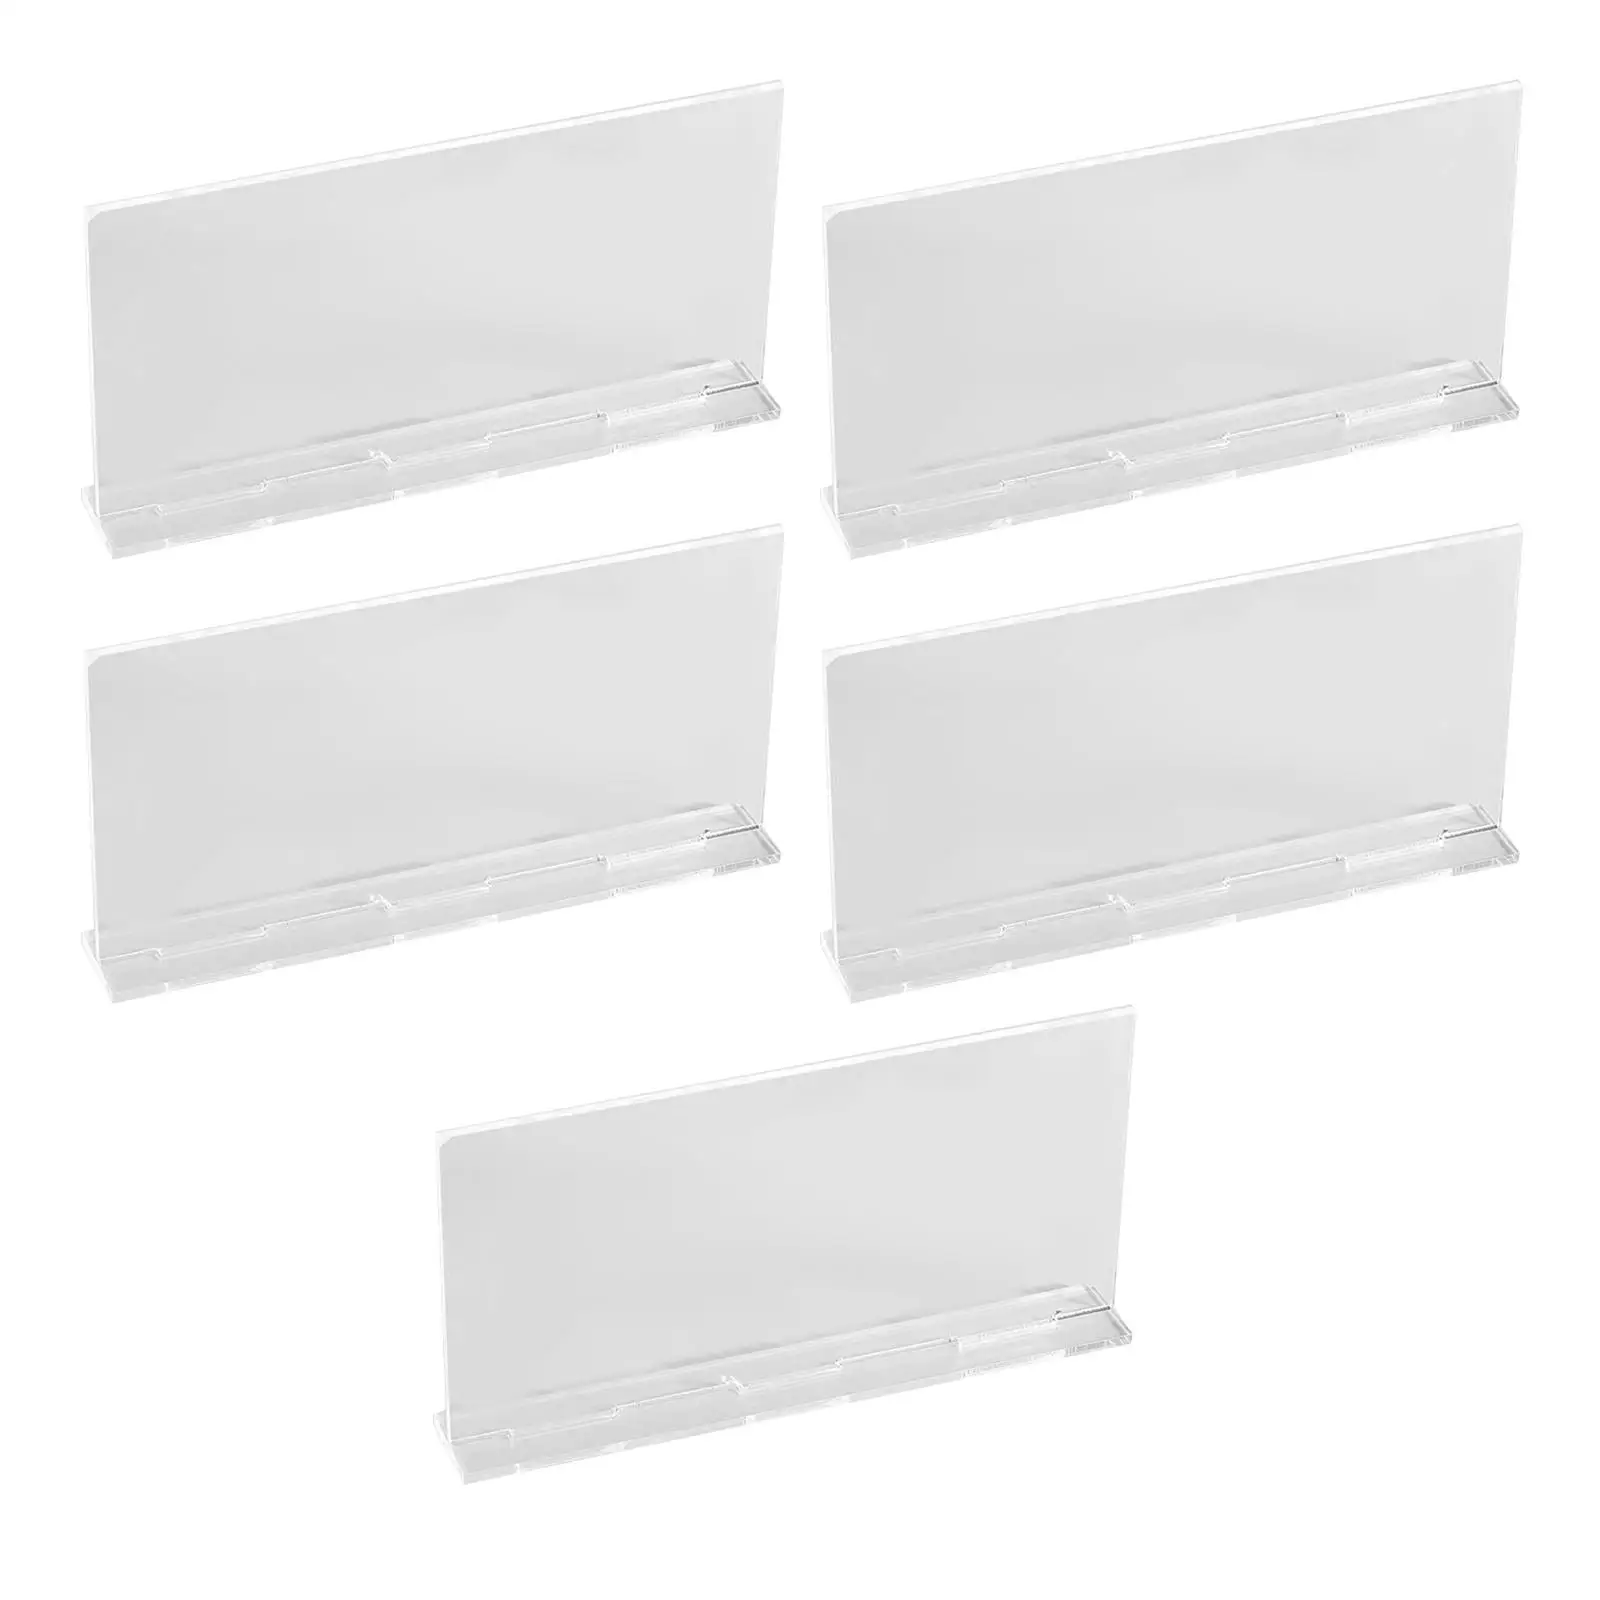 5x Clear Acrylic Place Cards Name Signs Cards Stand Rectangle Seating Name Cards Cards DIY for Wedding dinner Birthday Party